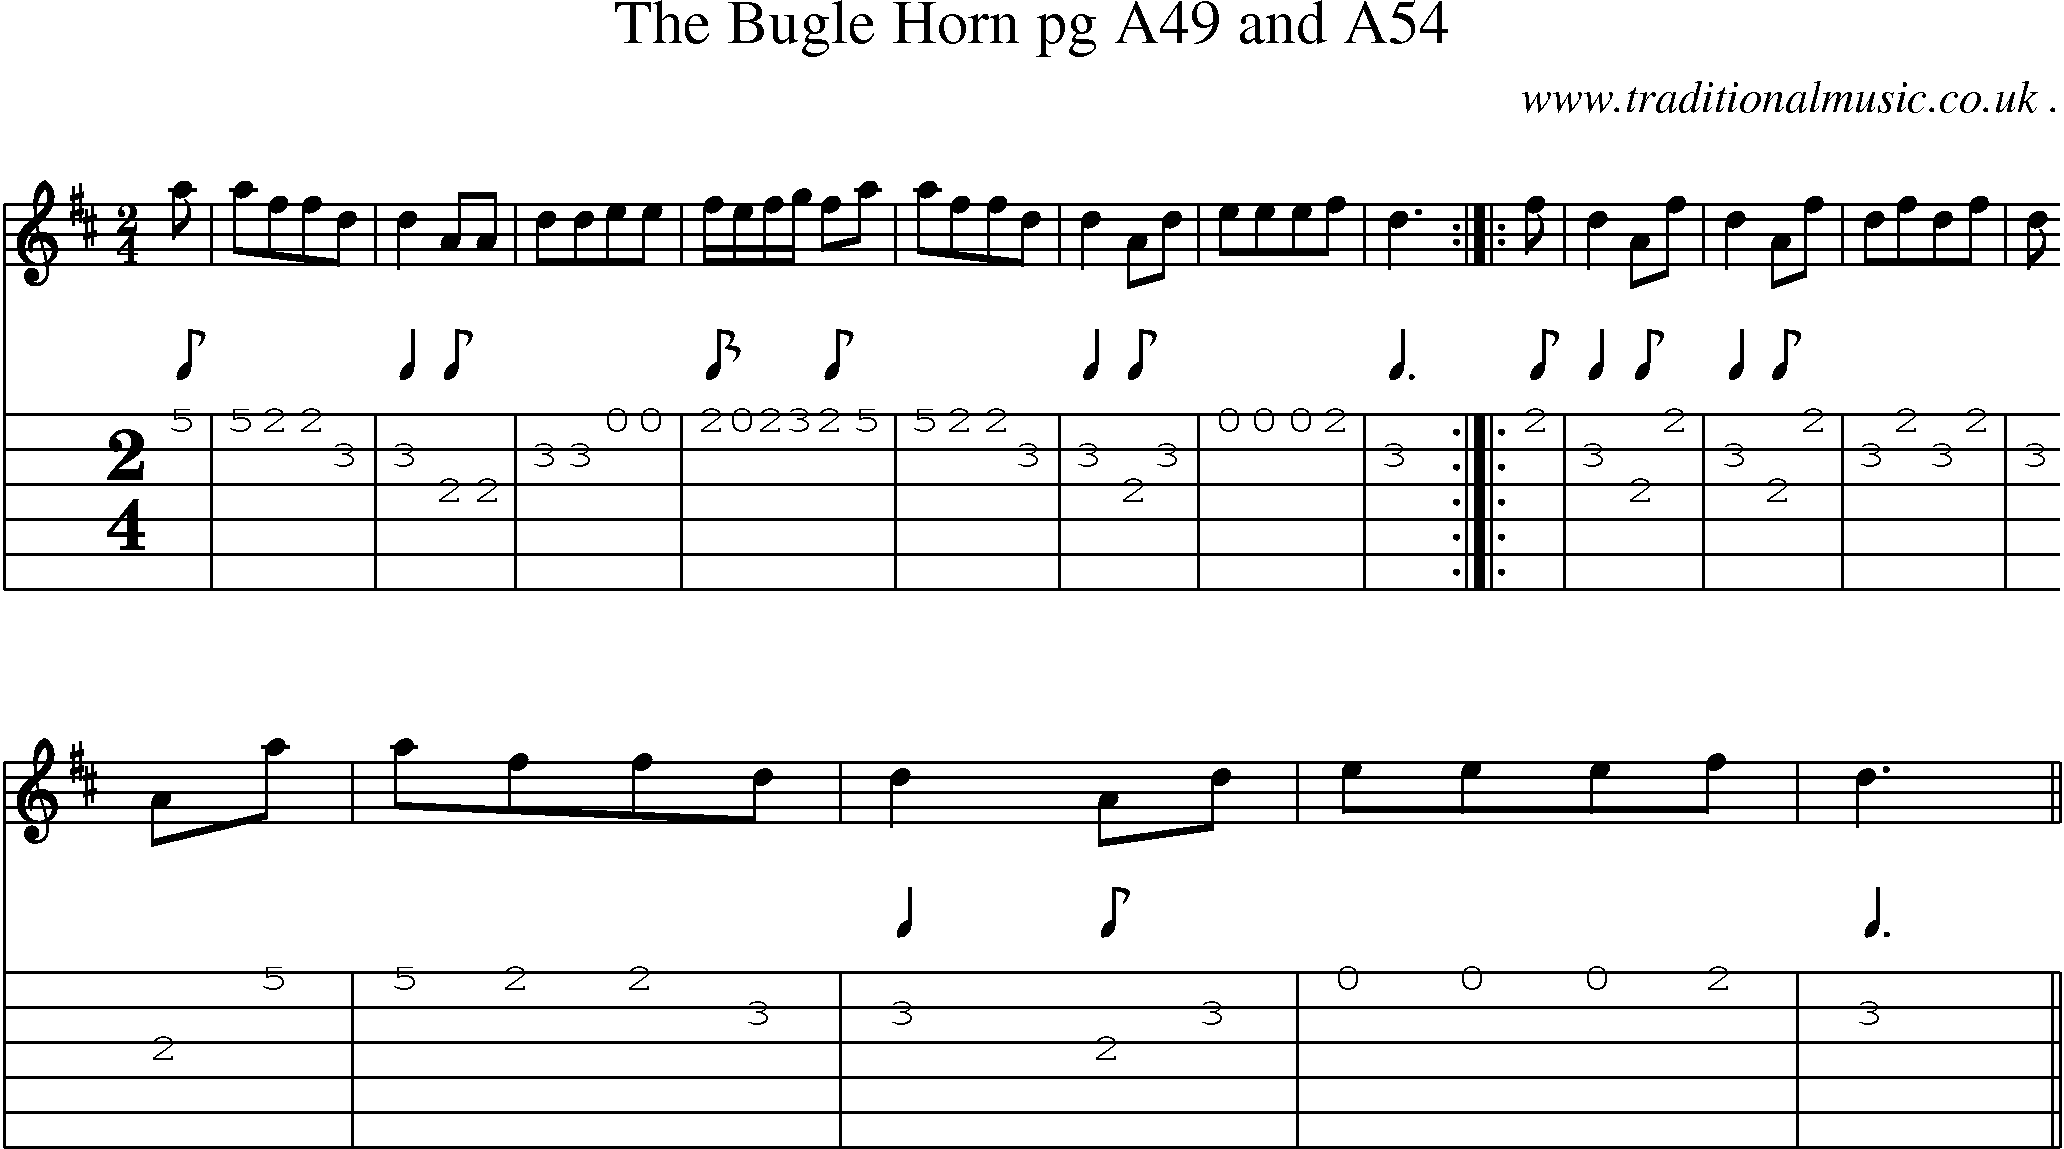 Sheet-Music and Guitar Tabs for The Bugle Horn Pg A49 And A54